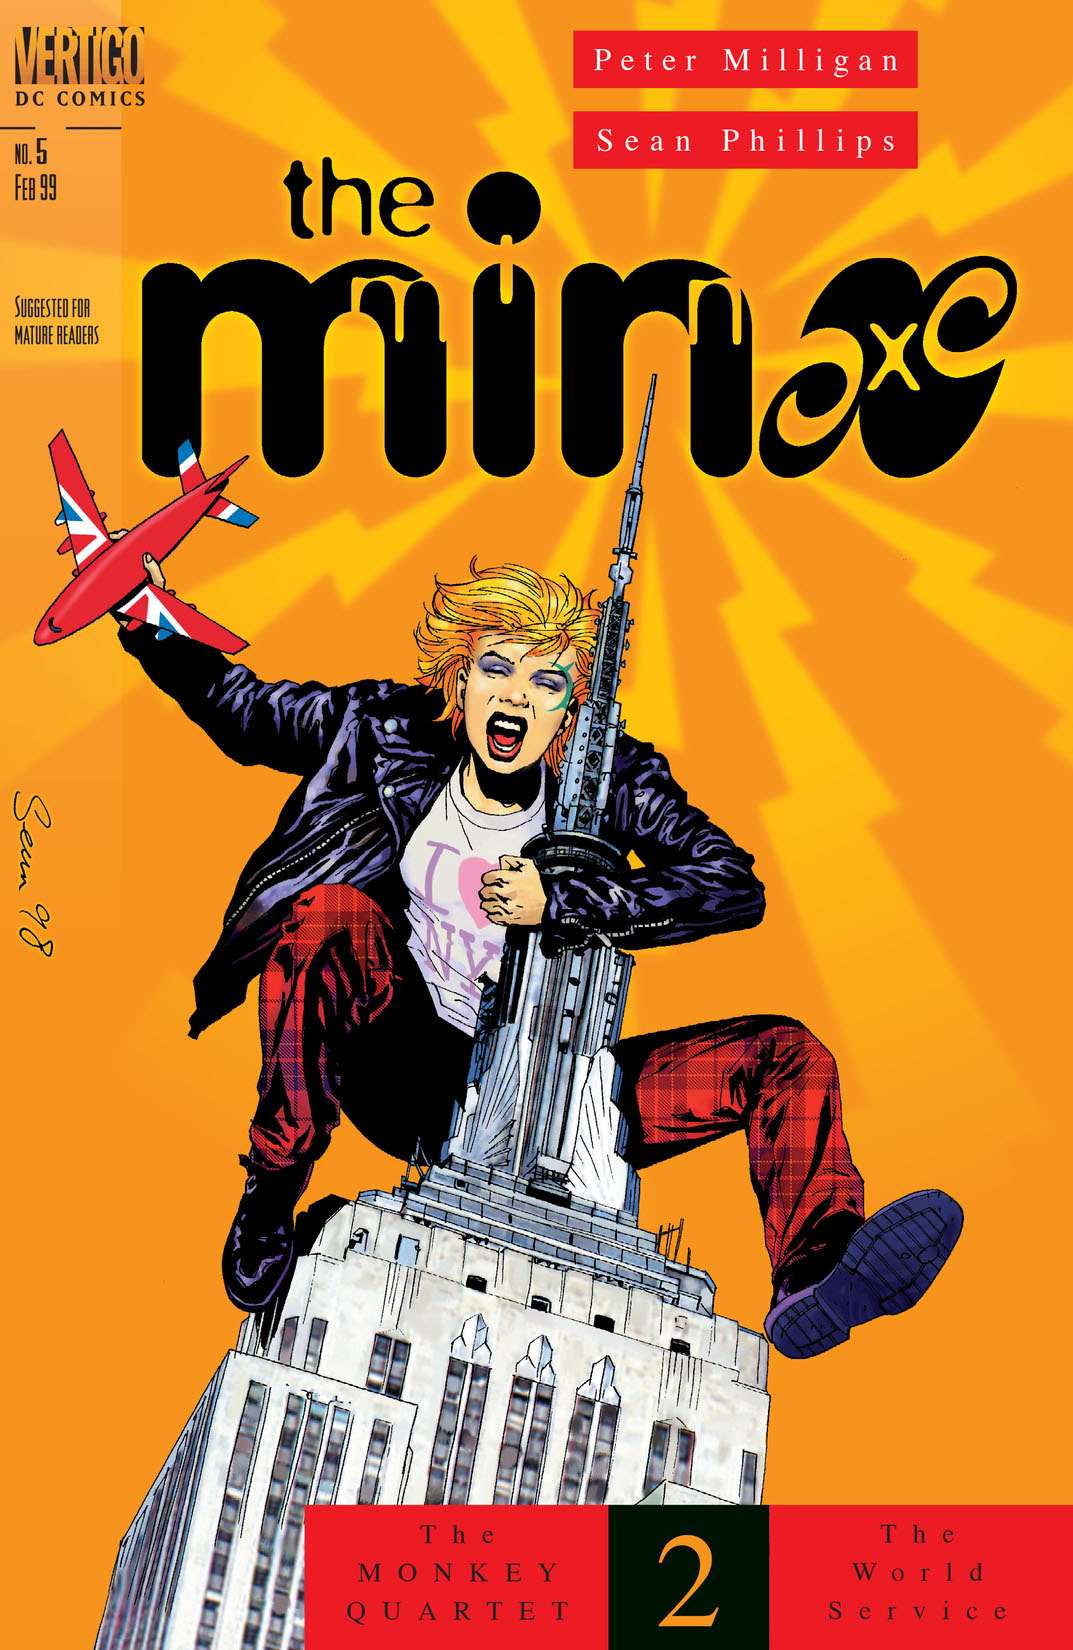 The Minx #5 preview images